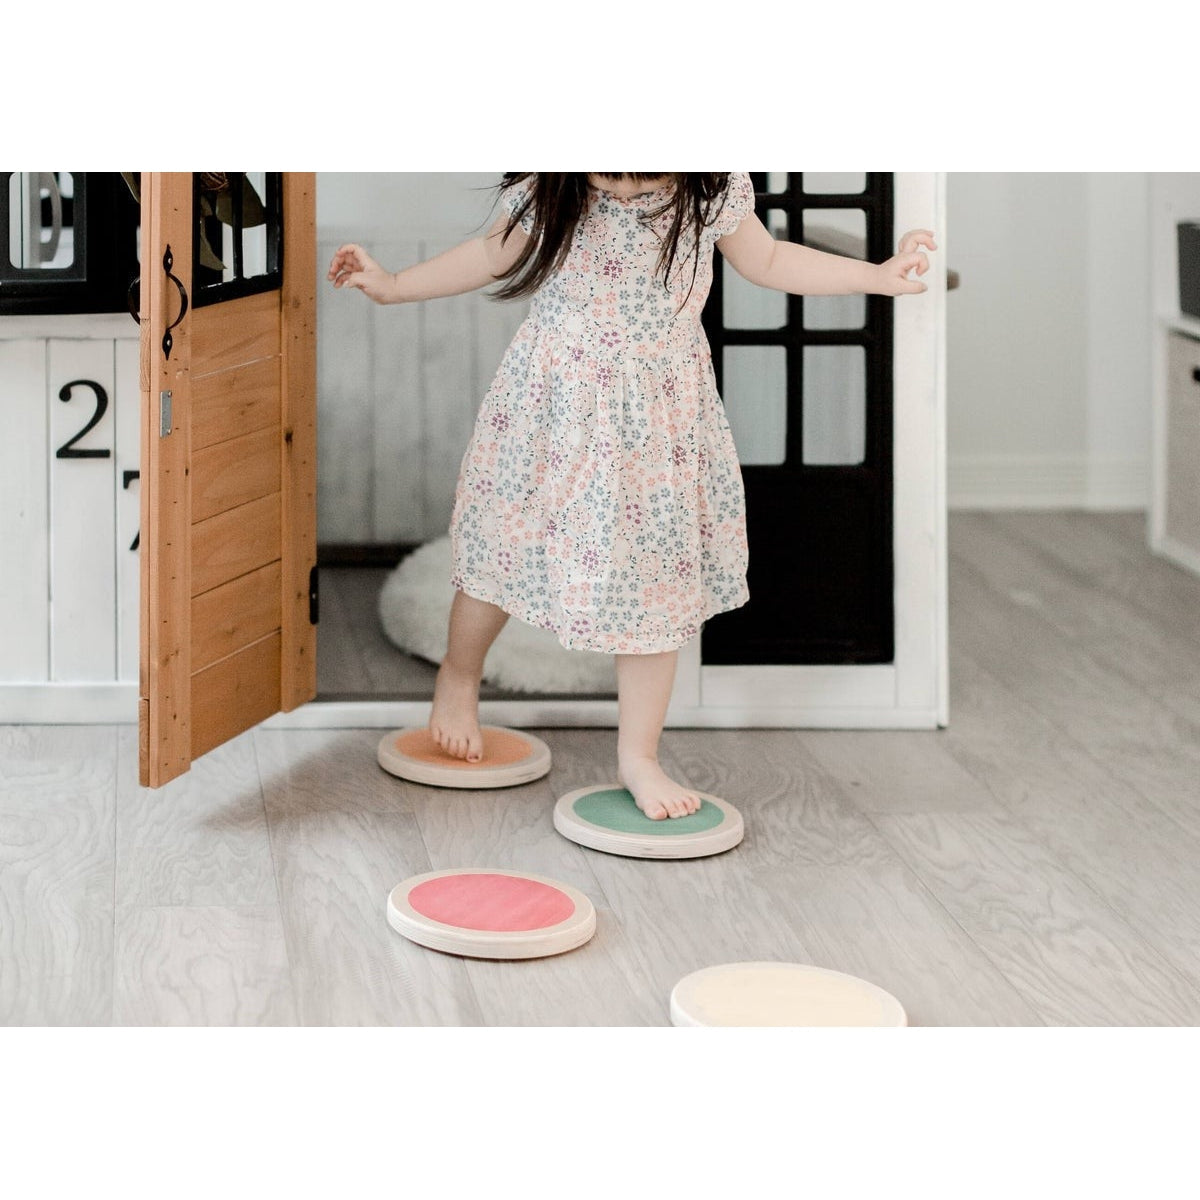 Little Steps Balancing Discs by Lily & River